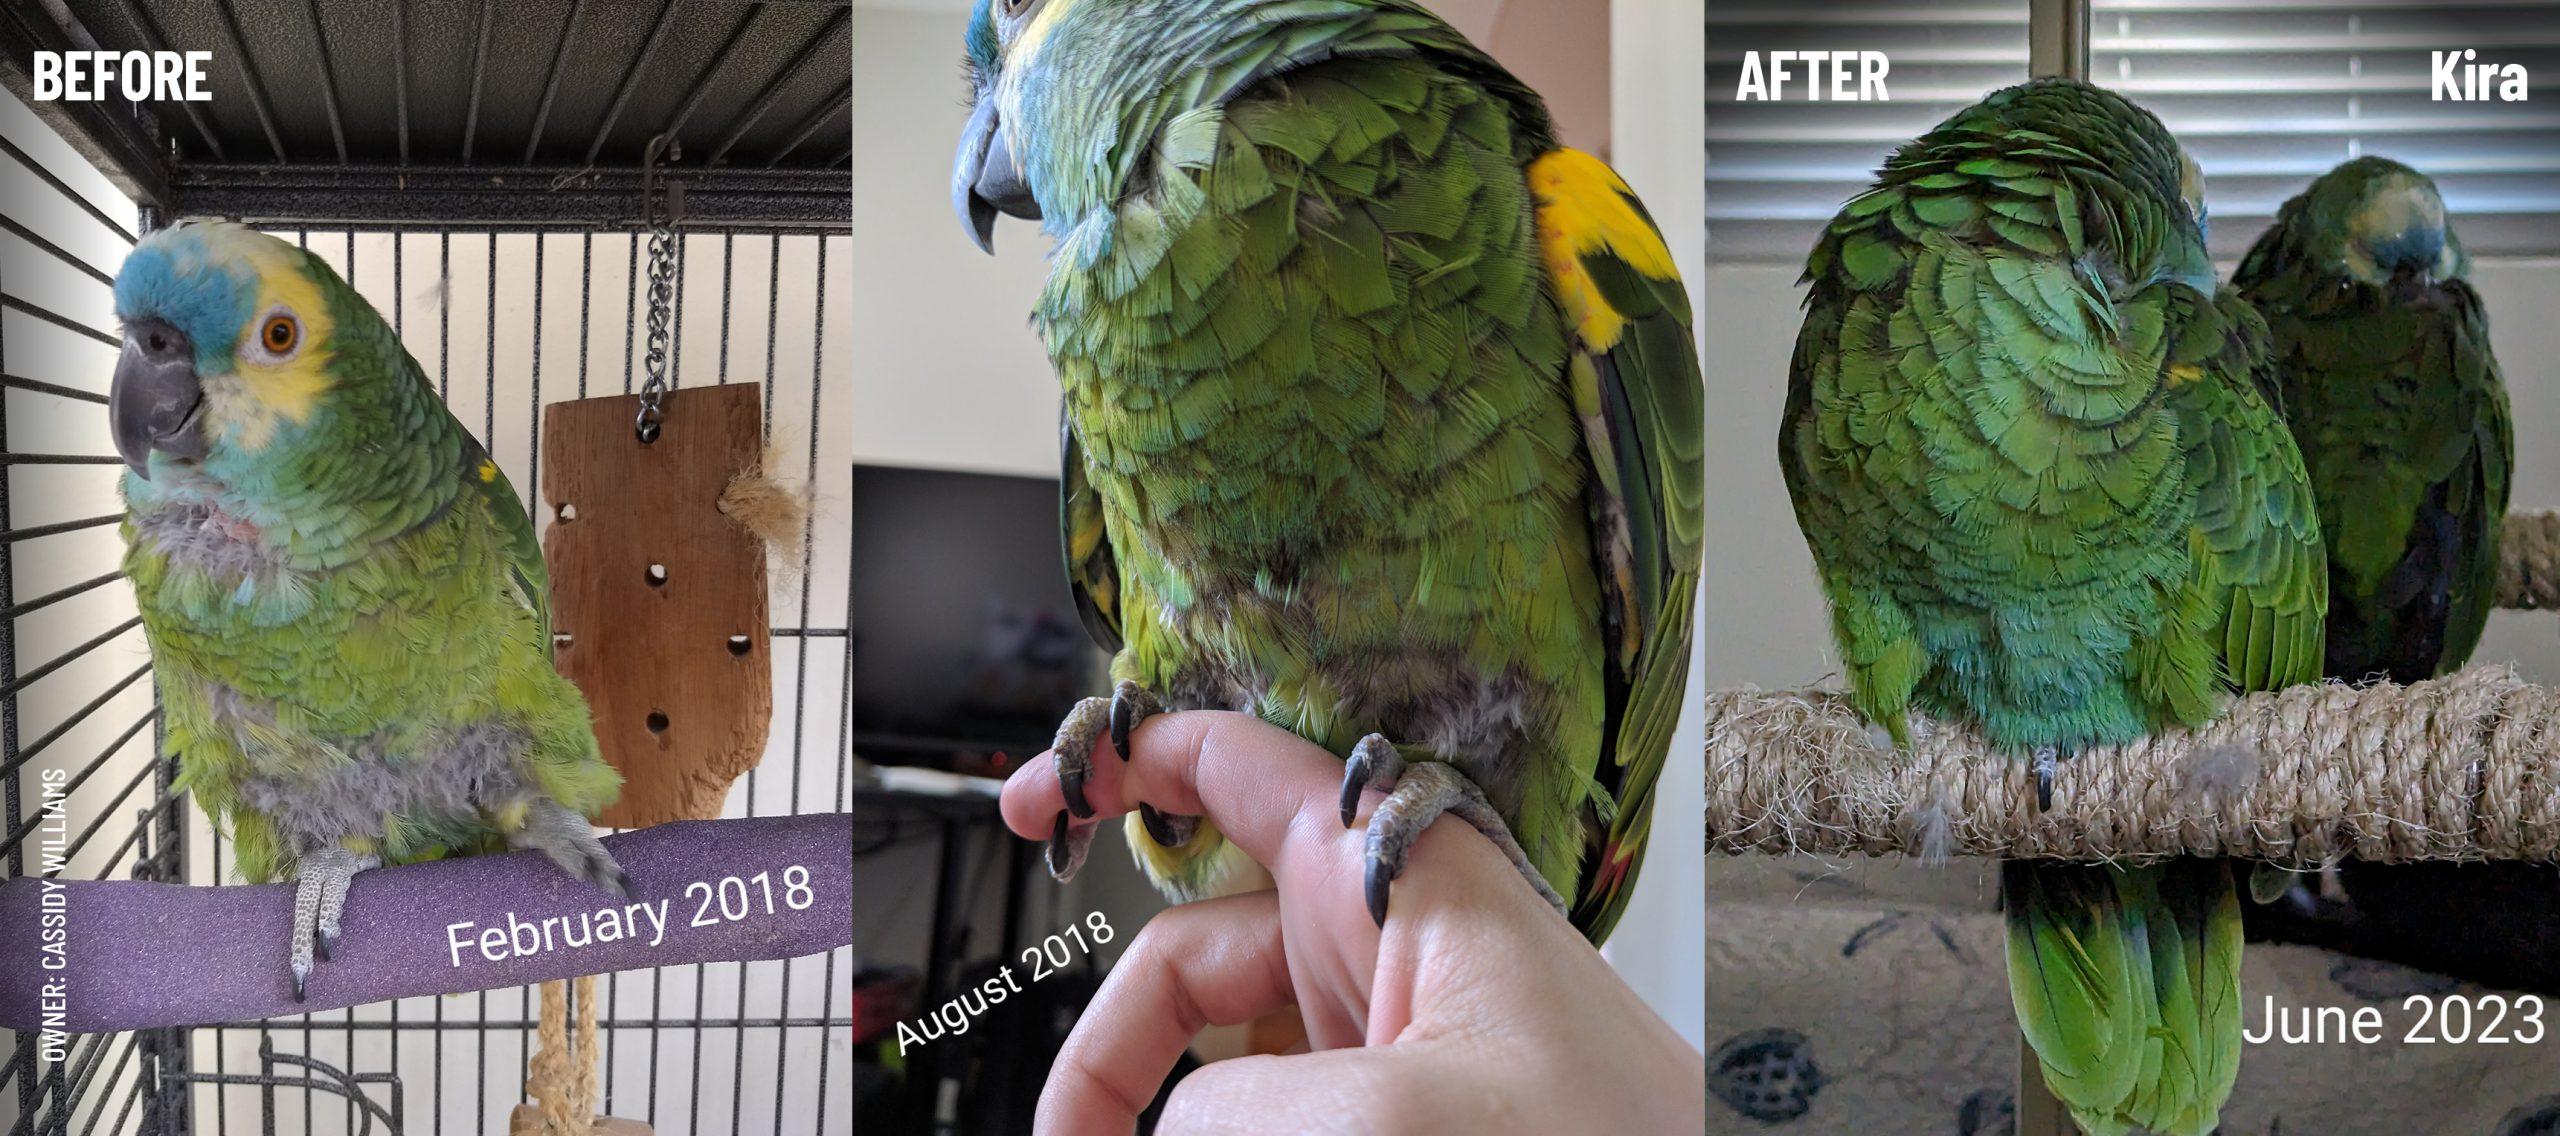 Three images showing Kira the Amazon parrot. In the 'before' image there are a lot of 'downy' feathers showing; in the 'after' image the plumage is full, the feathers are in good condition with no sign of plucking